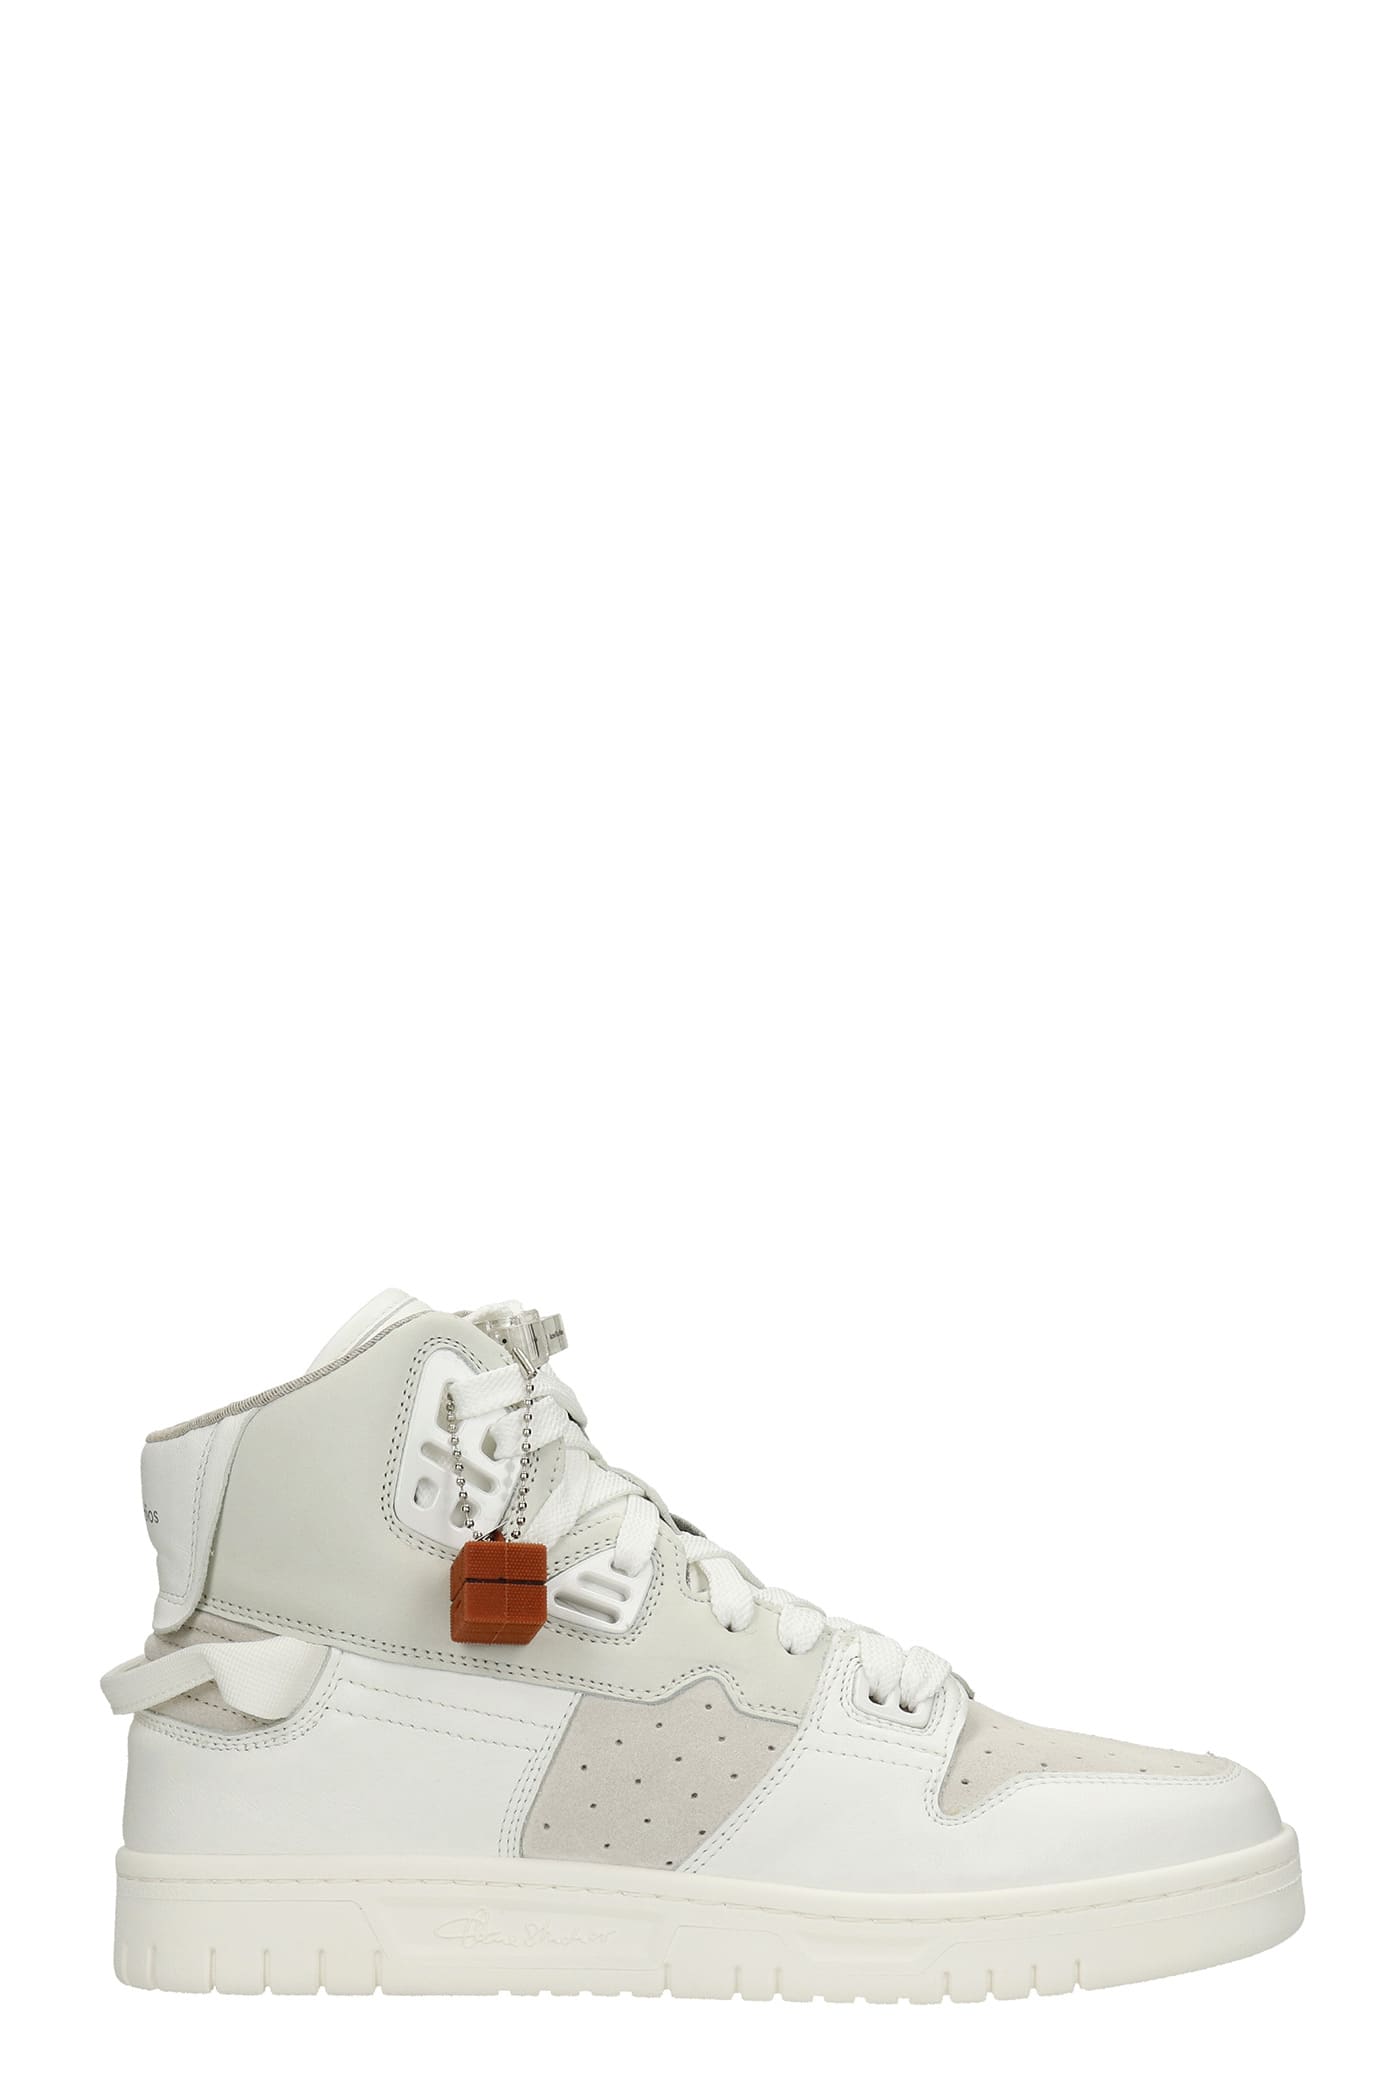 Acne Studios Sthmc High Mix Sneakers In White Suede And Leather